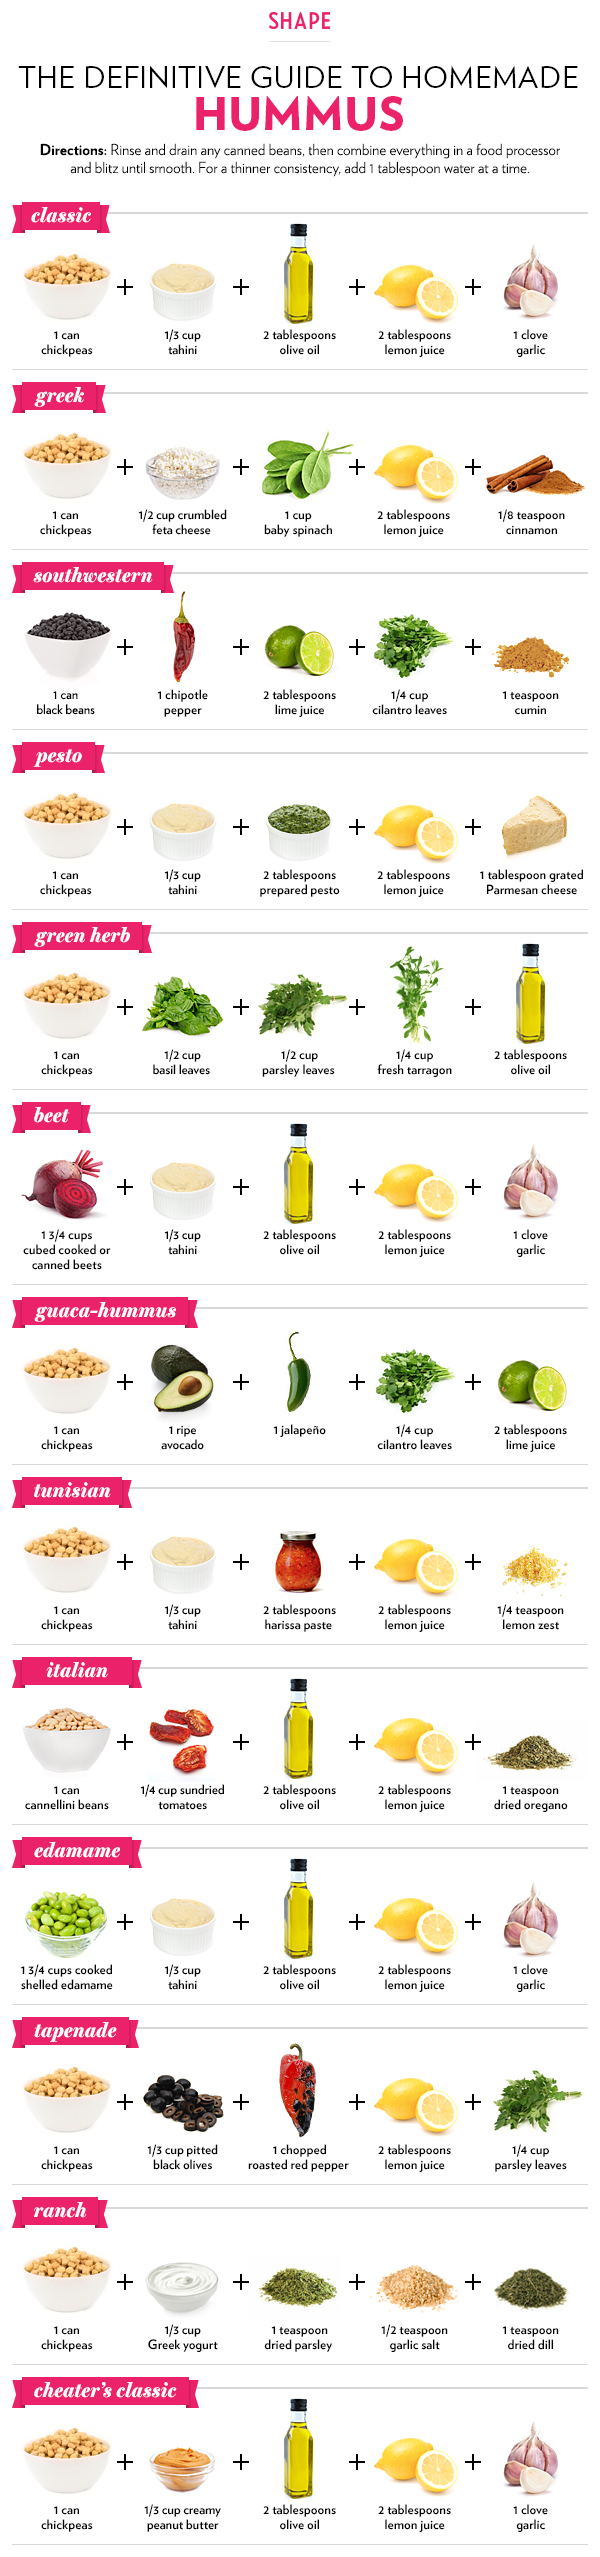 Homemade Hummus: The Definitive Guide Infographic